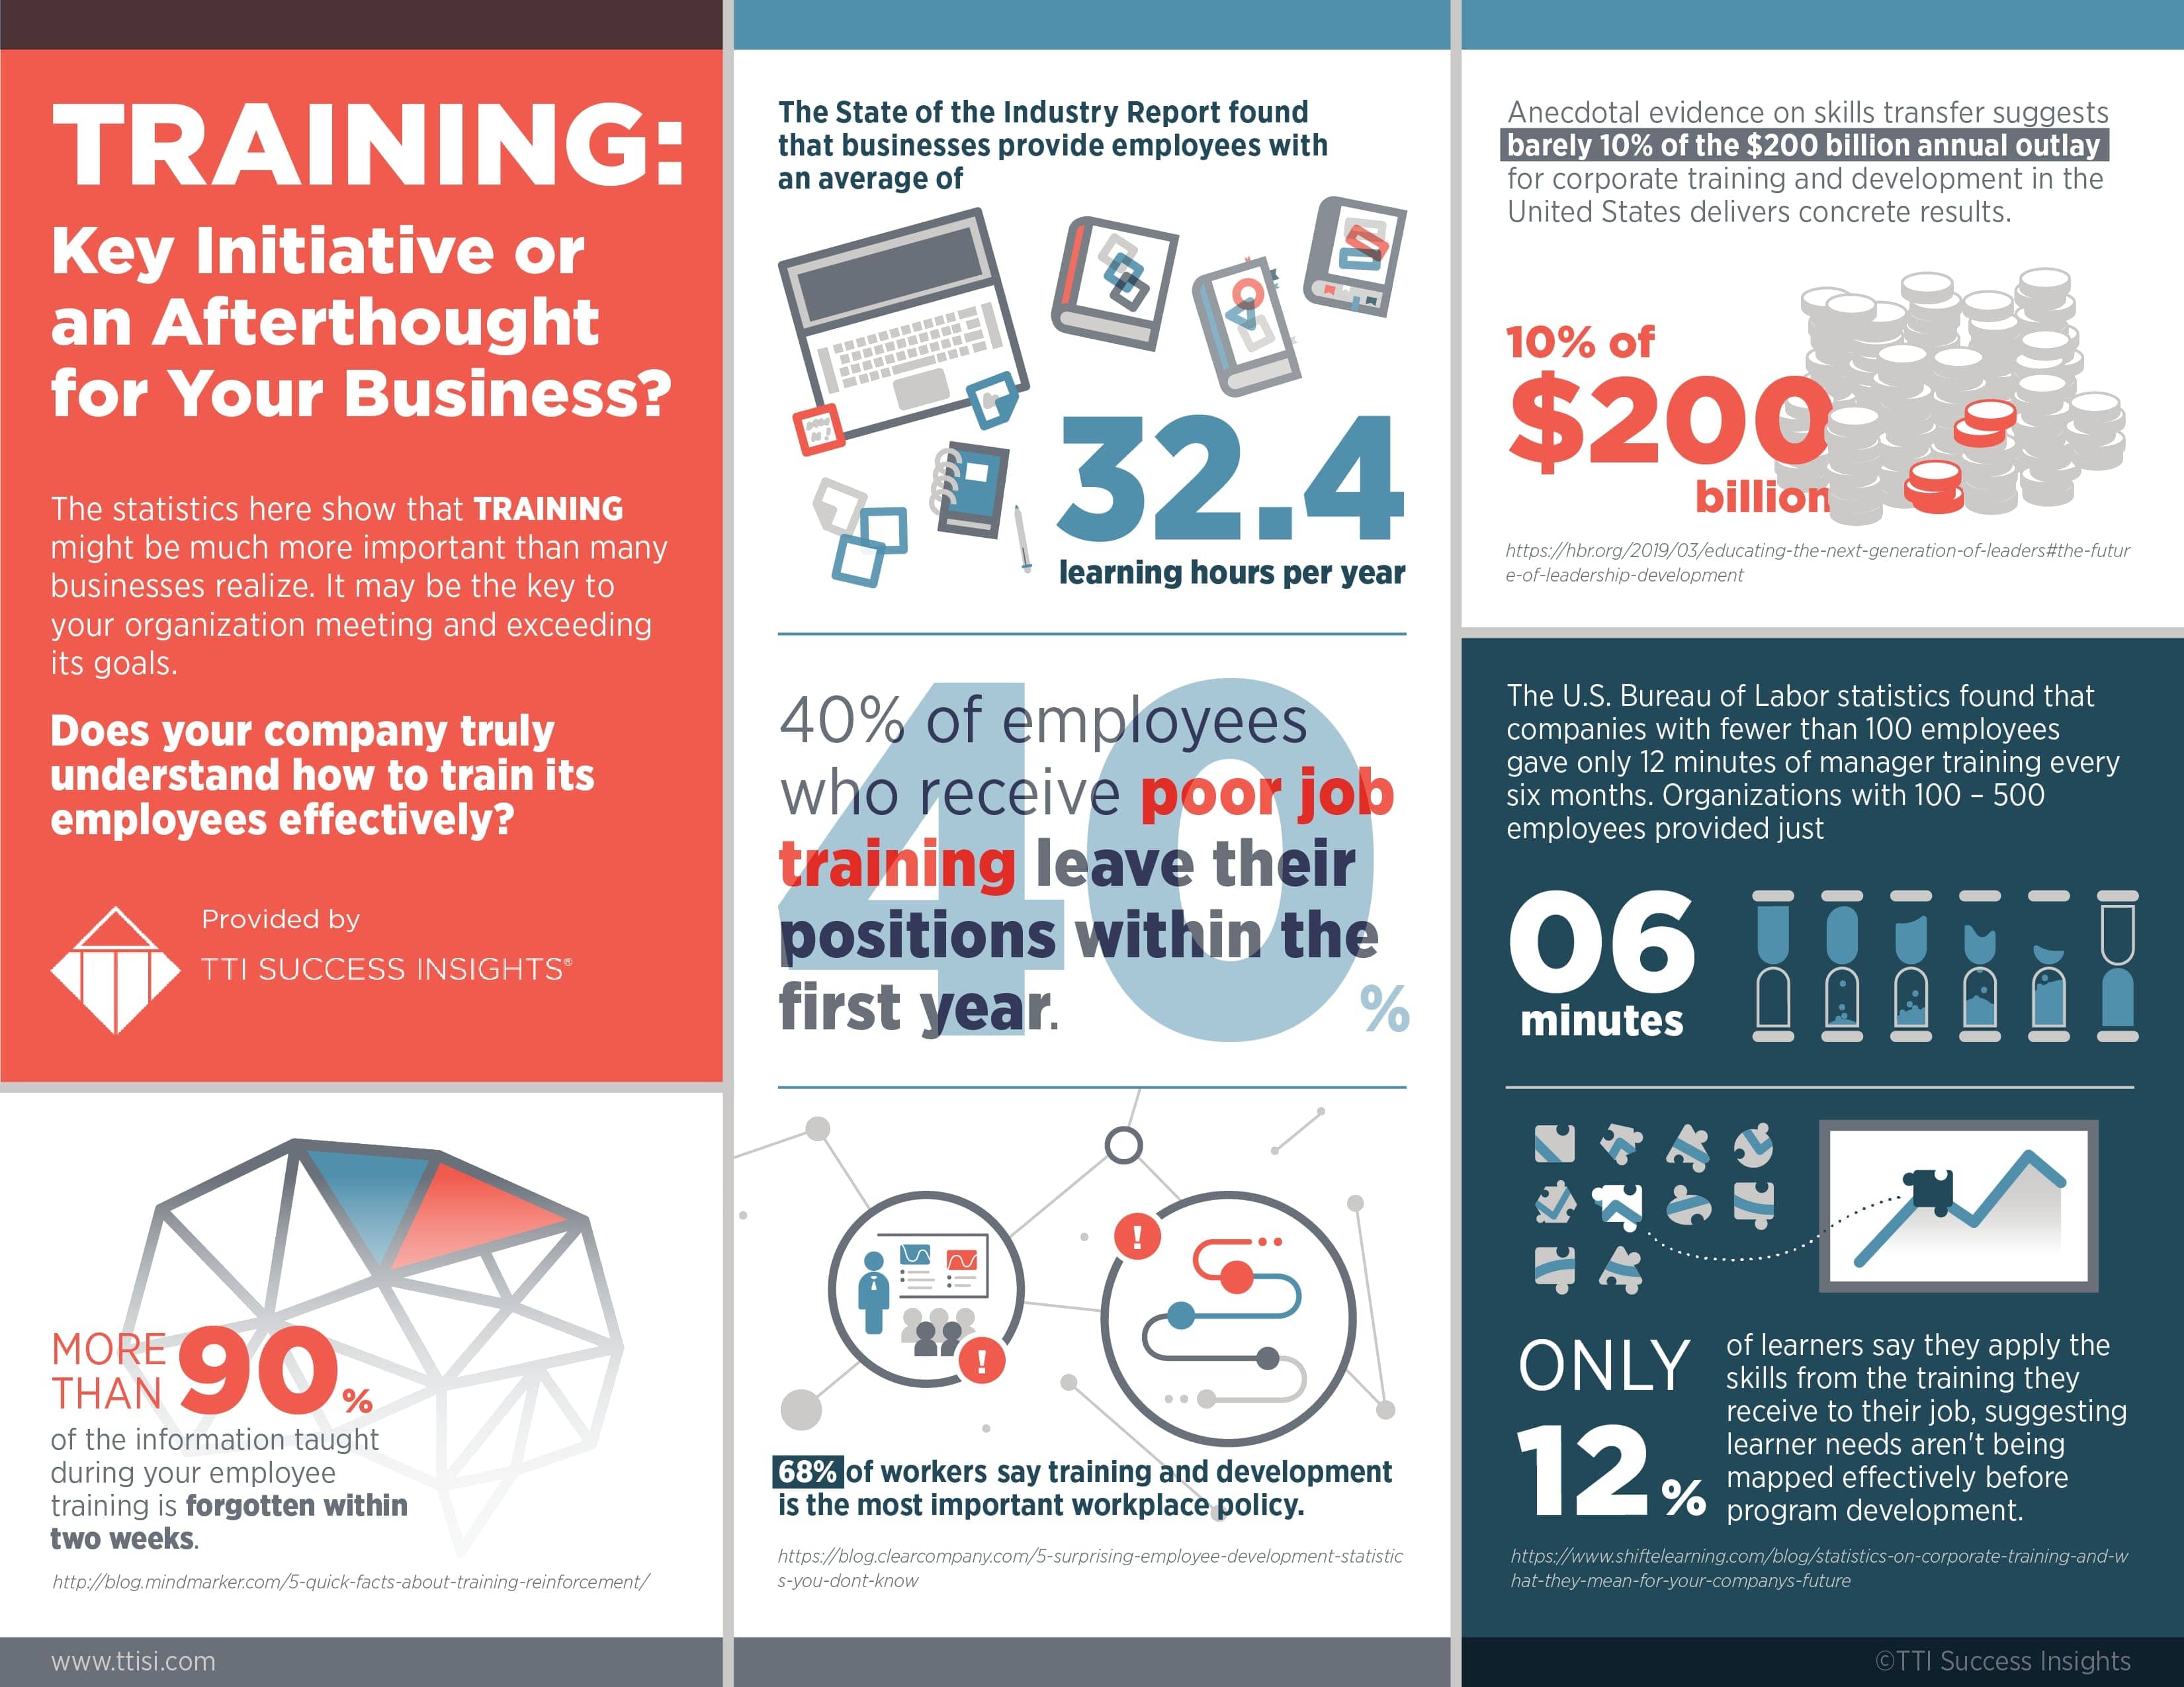 Training: Key Initiative or an Afterthought for Your Business? - Infographic